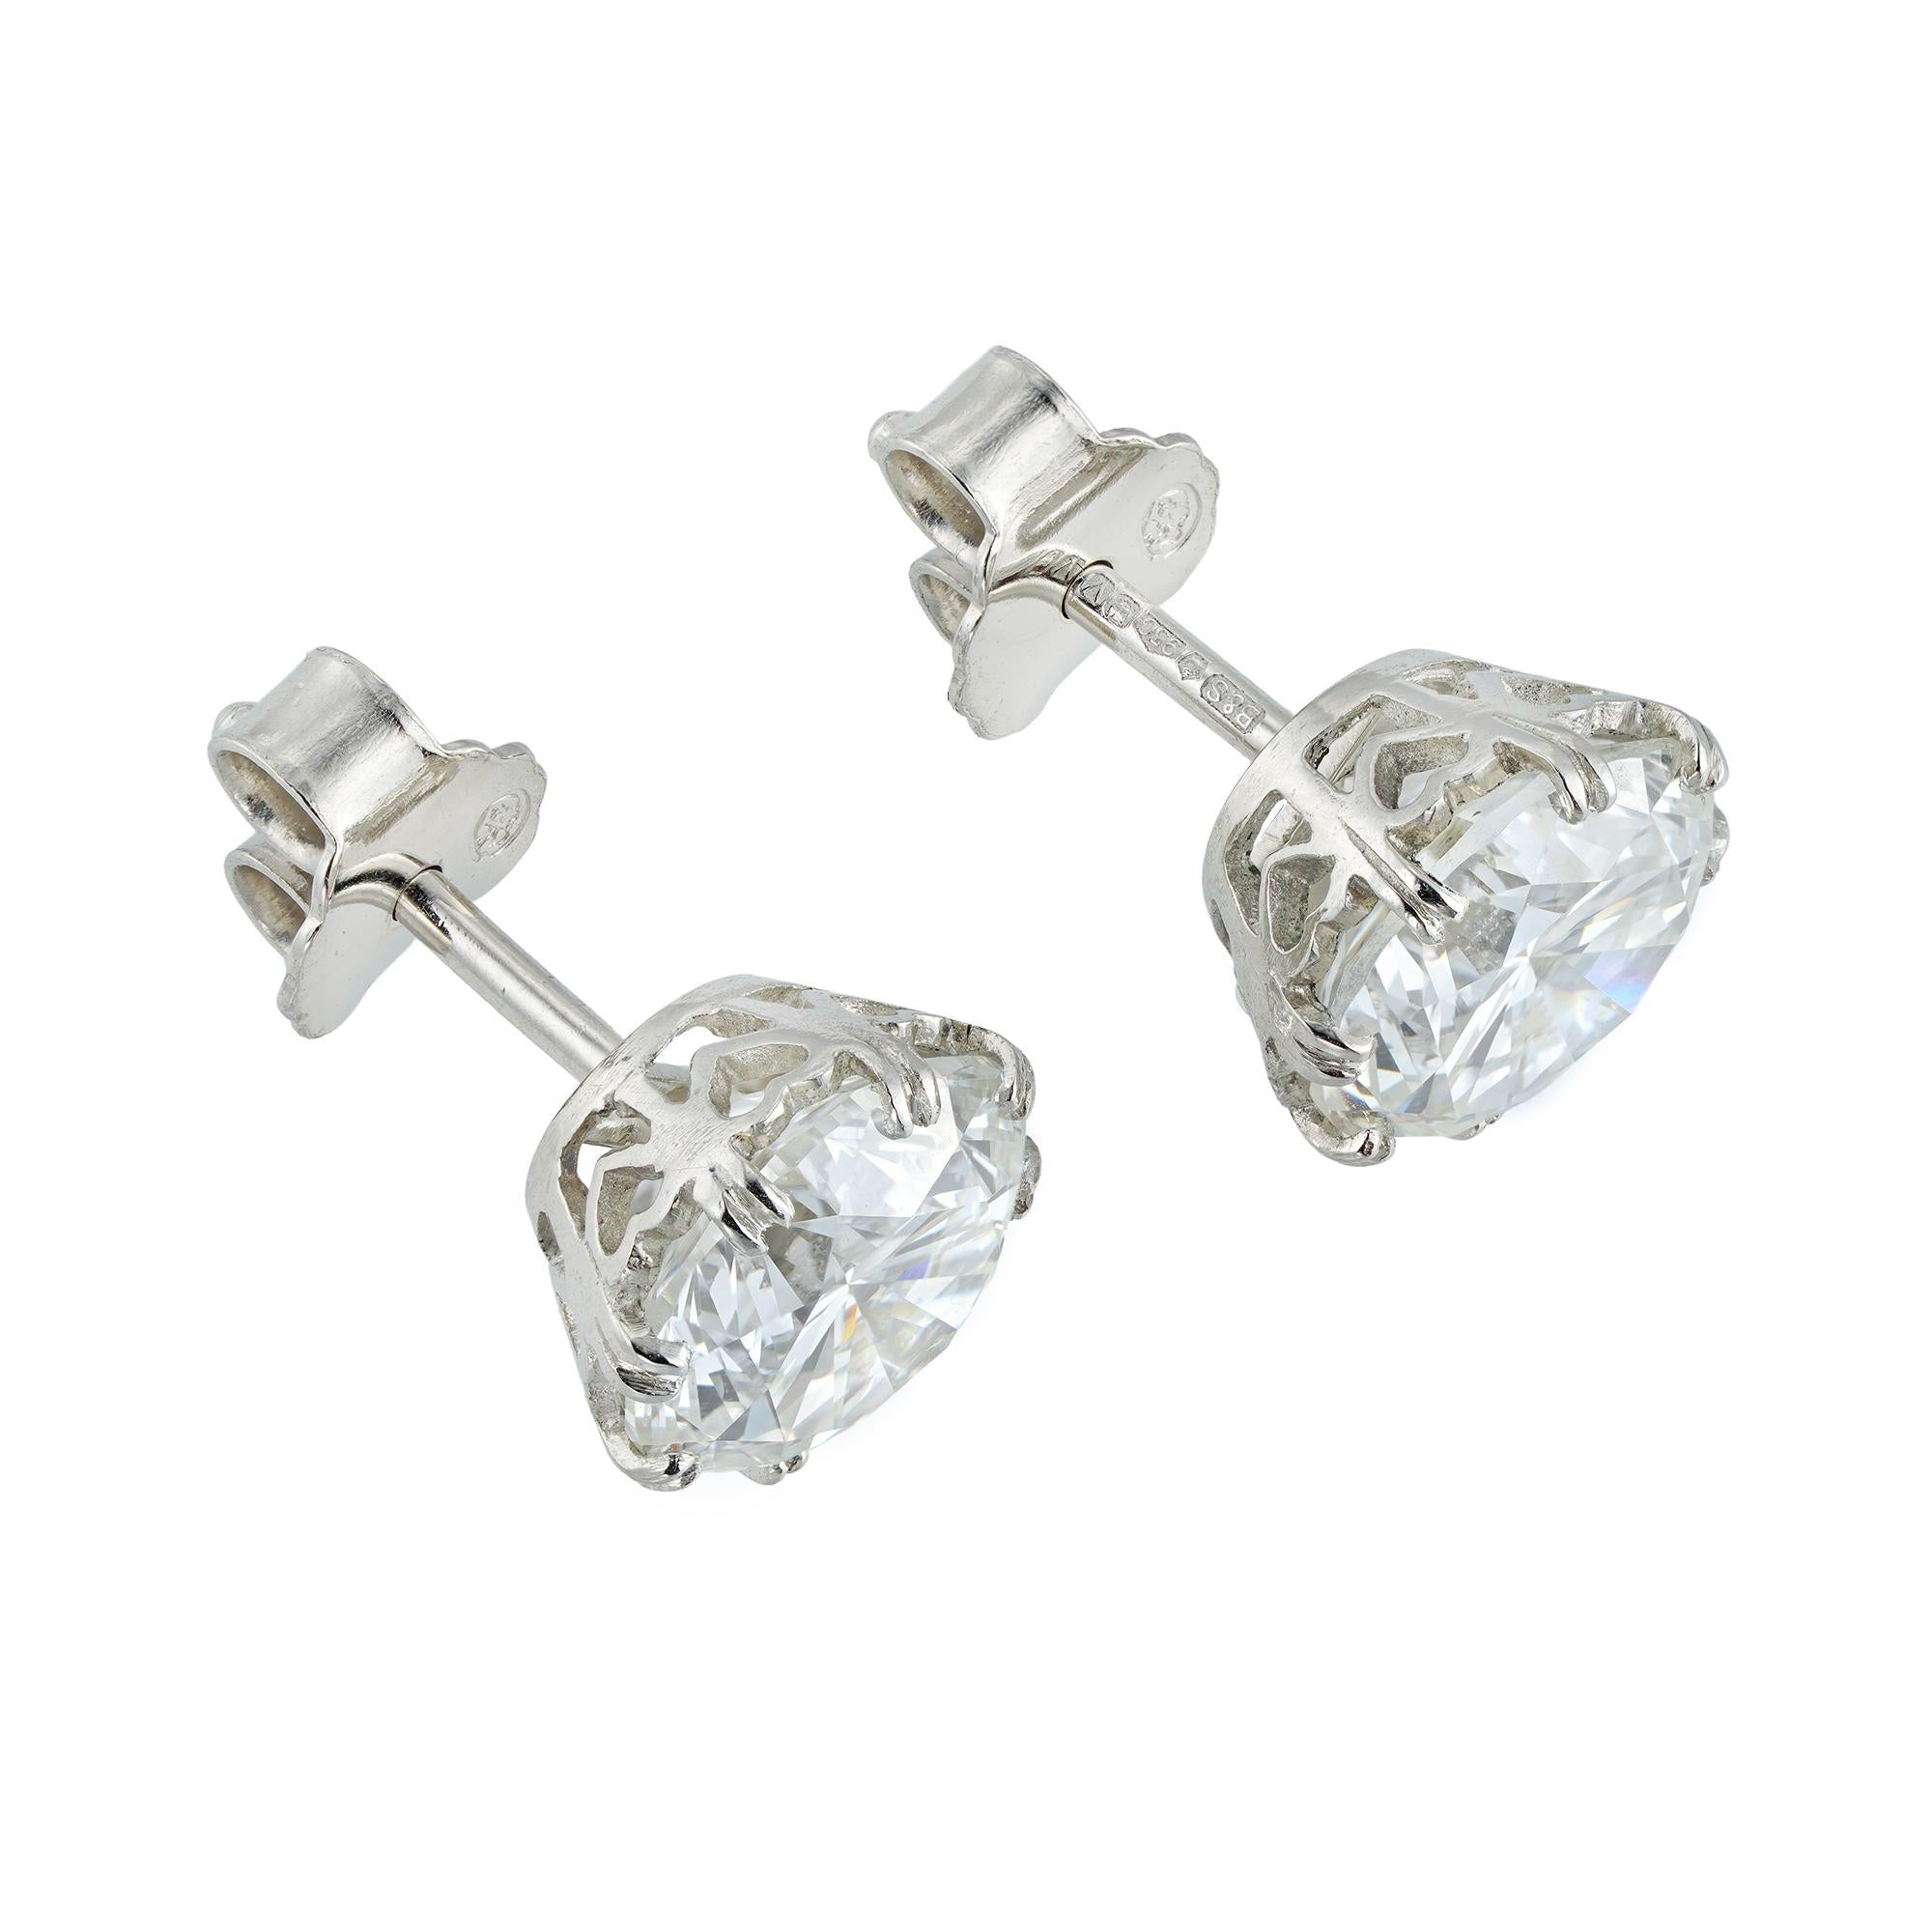 A pair of large diamond stud earrings, the one earring with a round brilliant-cut diamond weighing 2 carats, accompanied by GIA report stating to be of I colour and SI1 clarity, the other with a round brilliant cut weighing 2.01 carats, accompanied